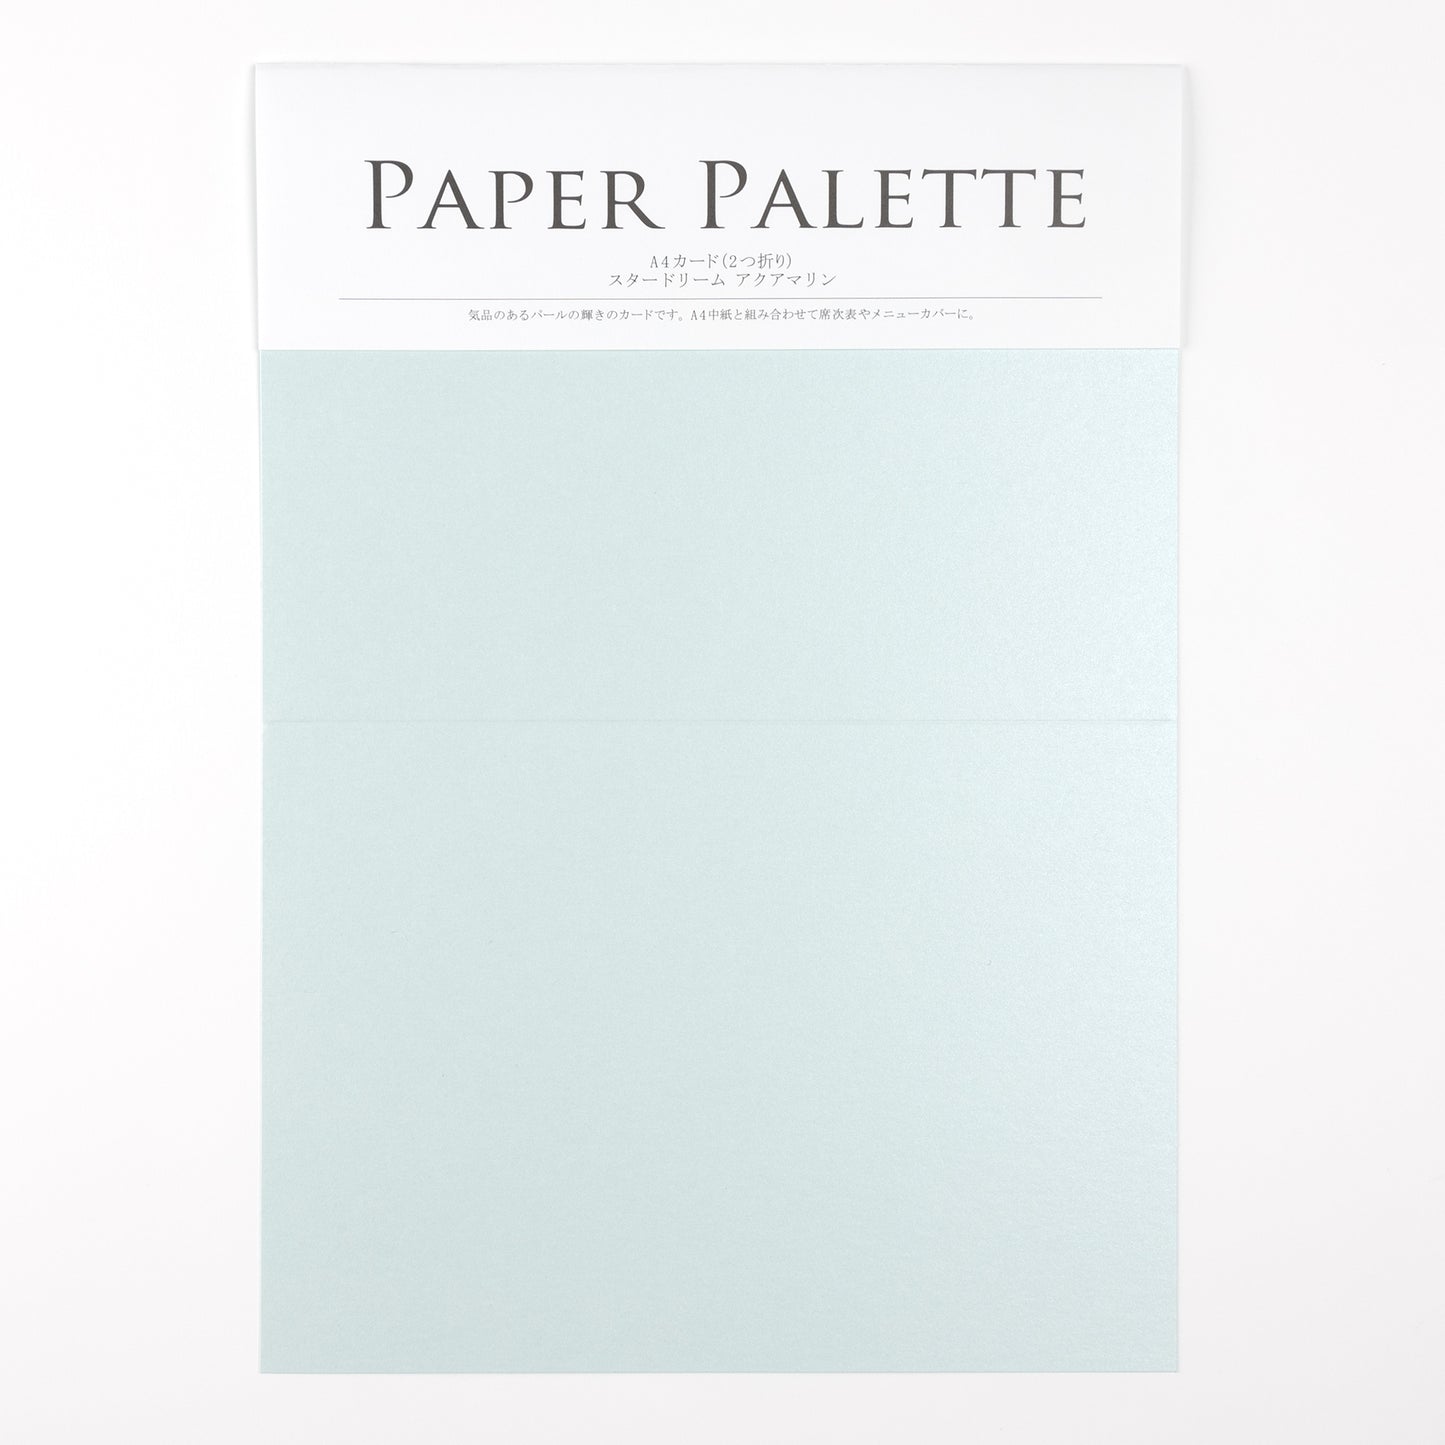 PAPER PALETTE A4 スタードリーム アクアマリン